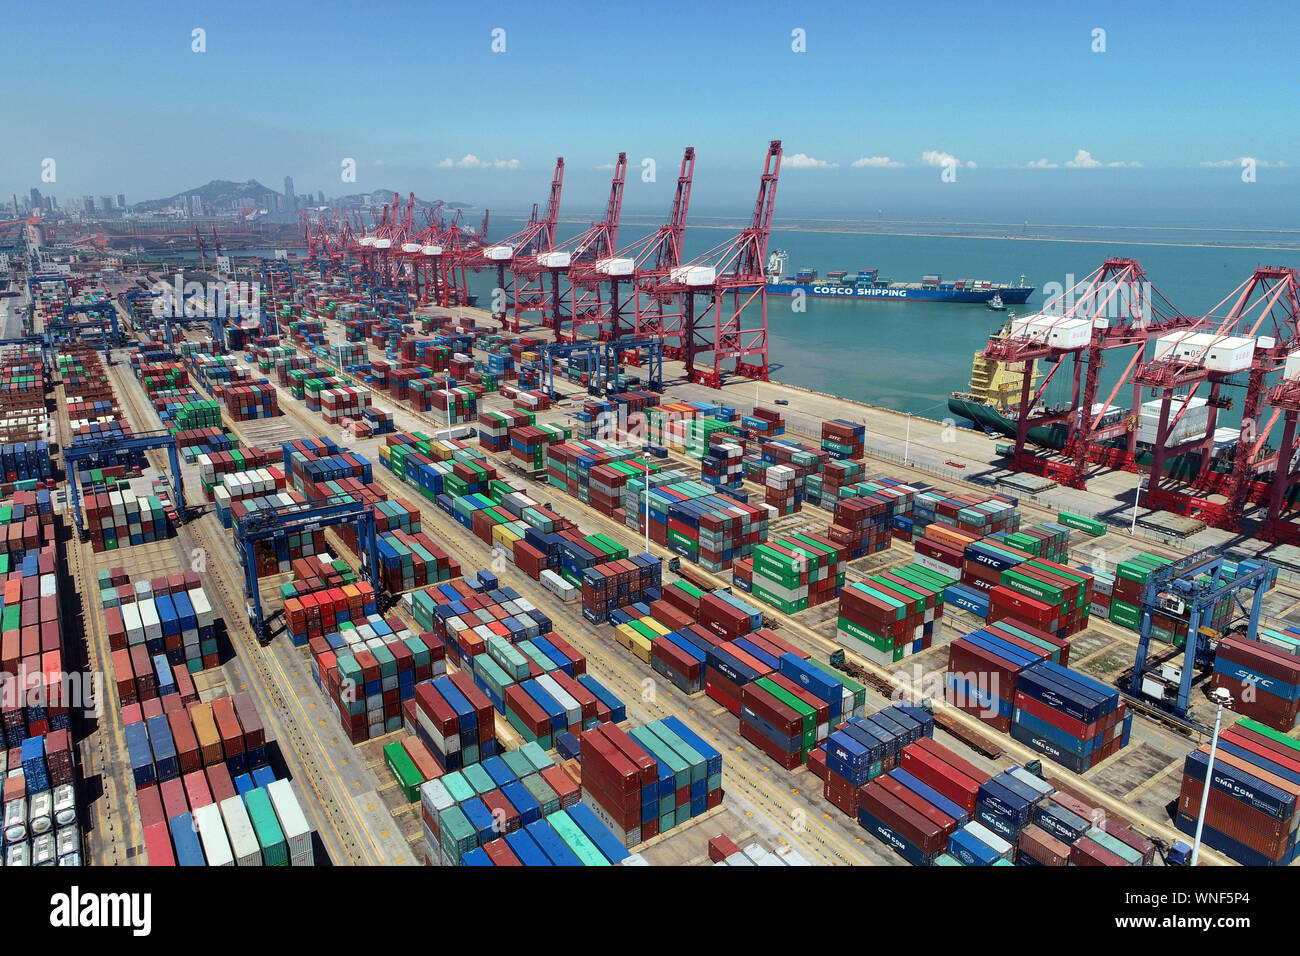 A view of a container terminal at Lianyungang Port in Lianyungang City, east China's Jiangsu Province on August 2nd, 2018. Stock Photo